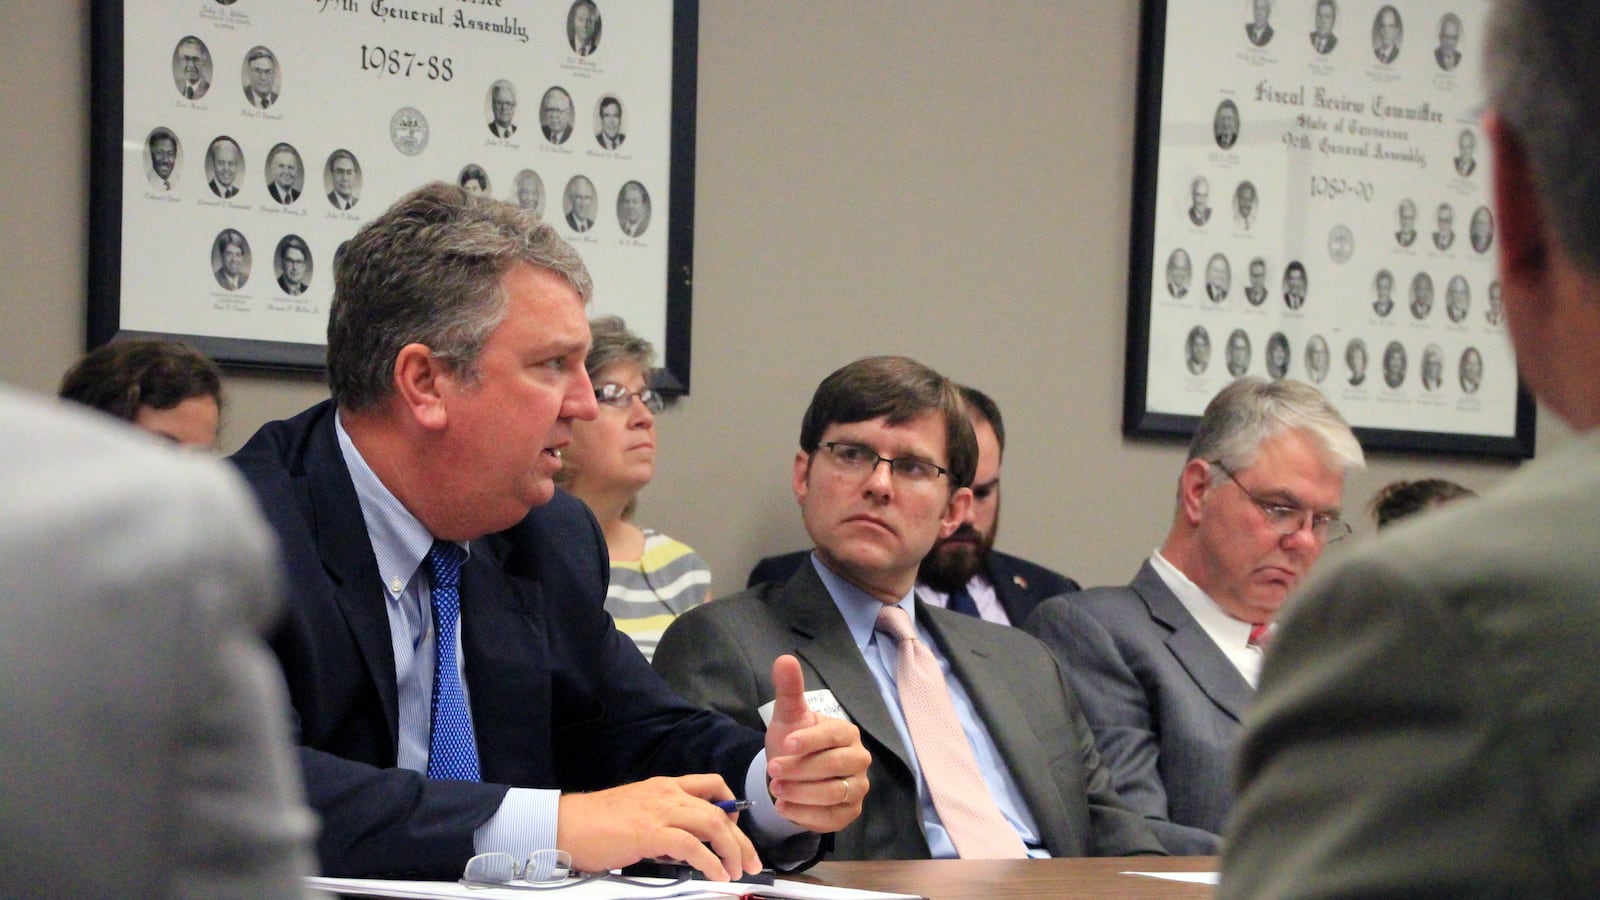 From left: Bartlett schools director David Stephens and Lakeland schools director Ted Horrell update state legislators on July 16 about the status of their new districts.